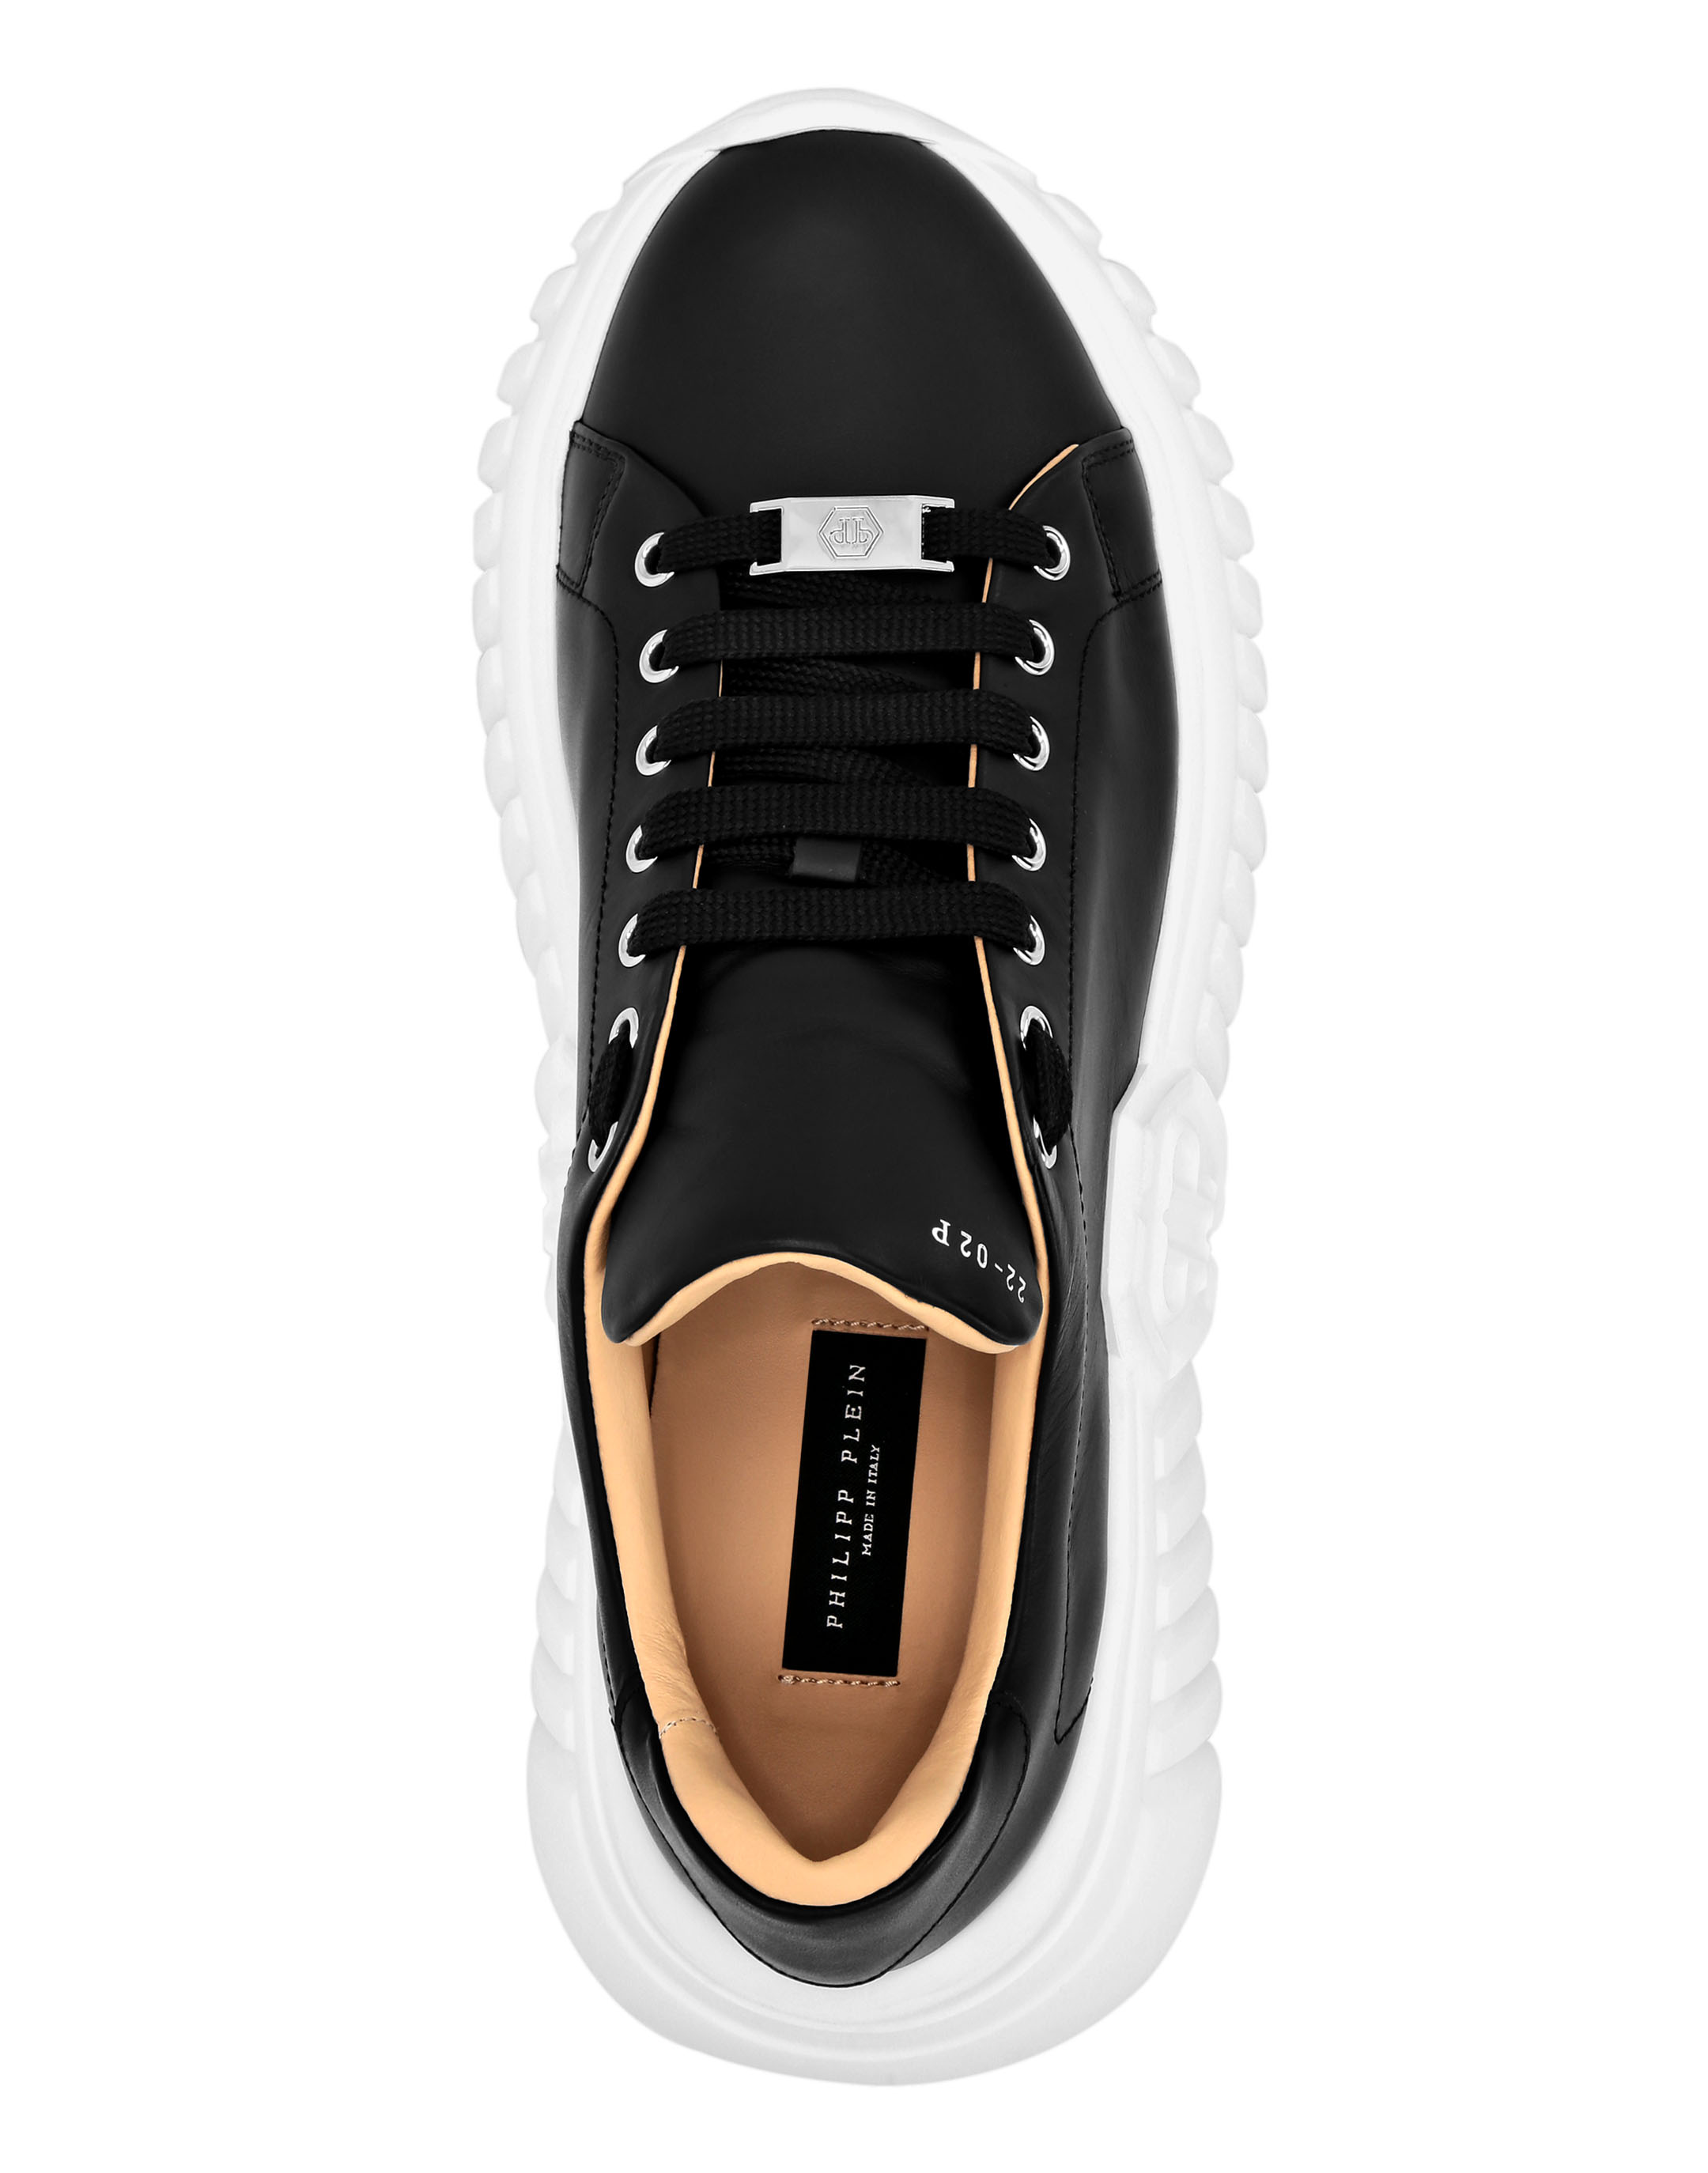 LO-TOP SNEAKERS SUPERSONIC | Philipp Plein Outlet